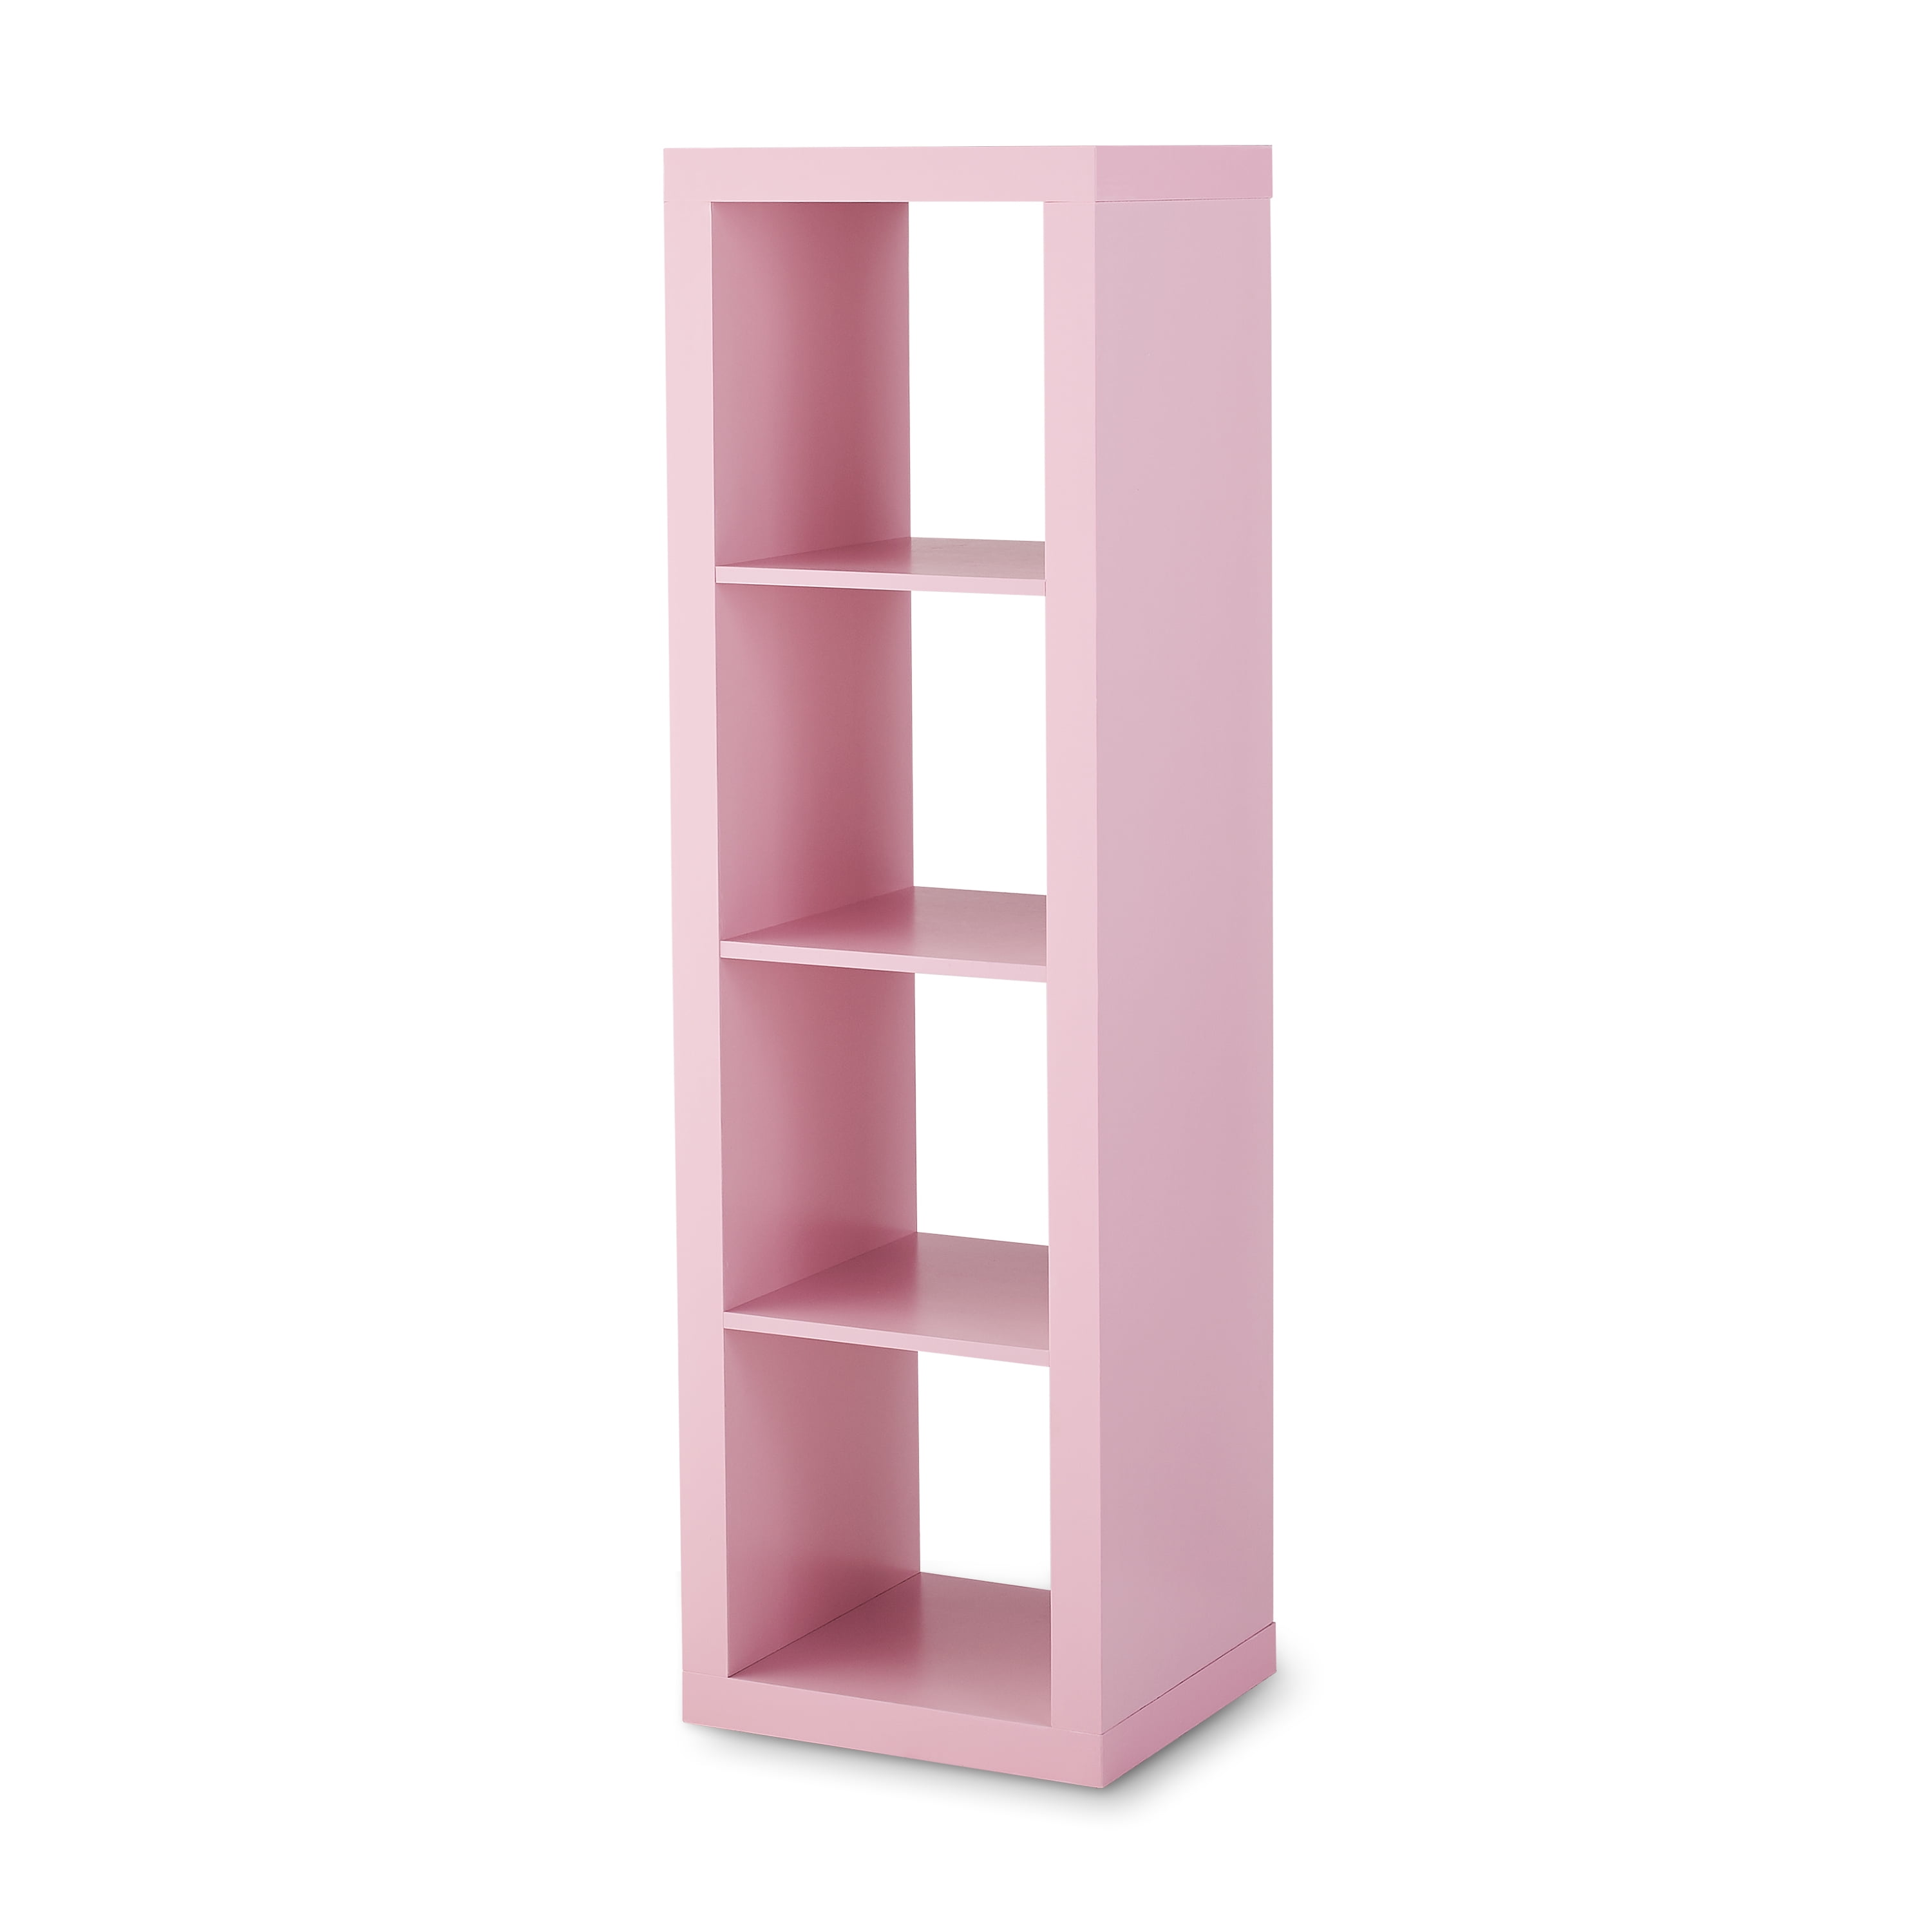 Better Homes and Gardens 4 Cube Organizer Storage Bookcase Multiple Colors